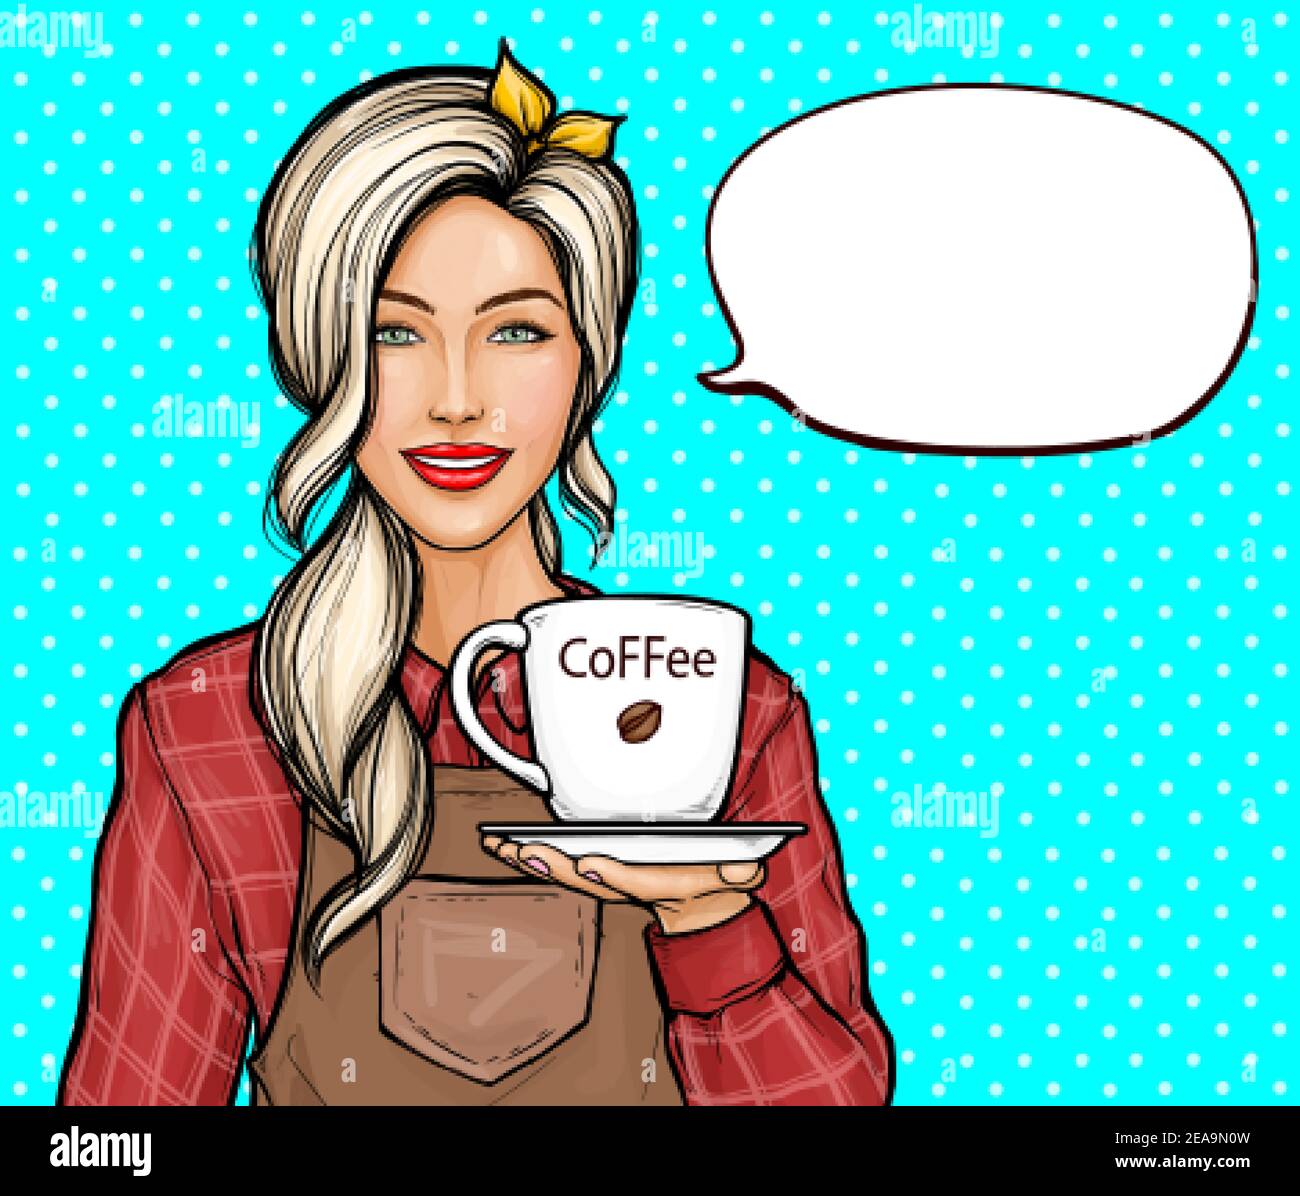 Pop art vector illustration of female barista. Smiling woman in shirt and apron holding cup or mug of freshly brewed coffee, offering a hot drink to visitors. Coffeeshop or cafe ad banner template. Stock Vector